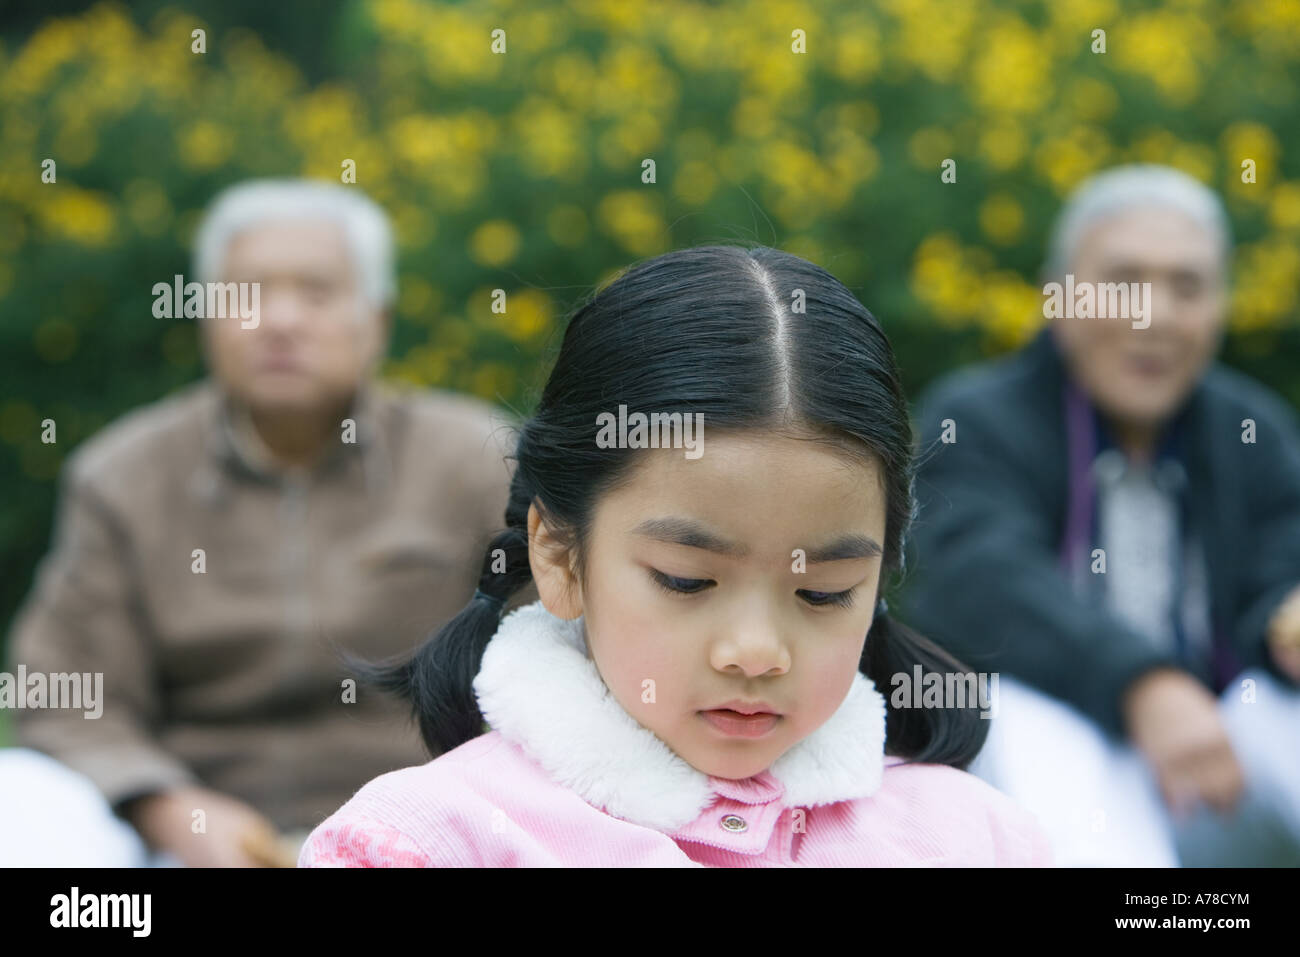 Girl looking down, grandparents in blurred background Stock Photo